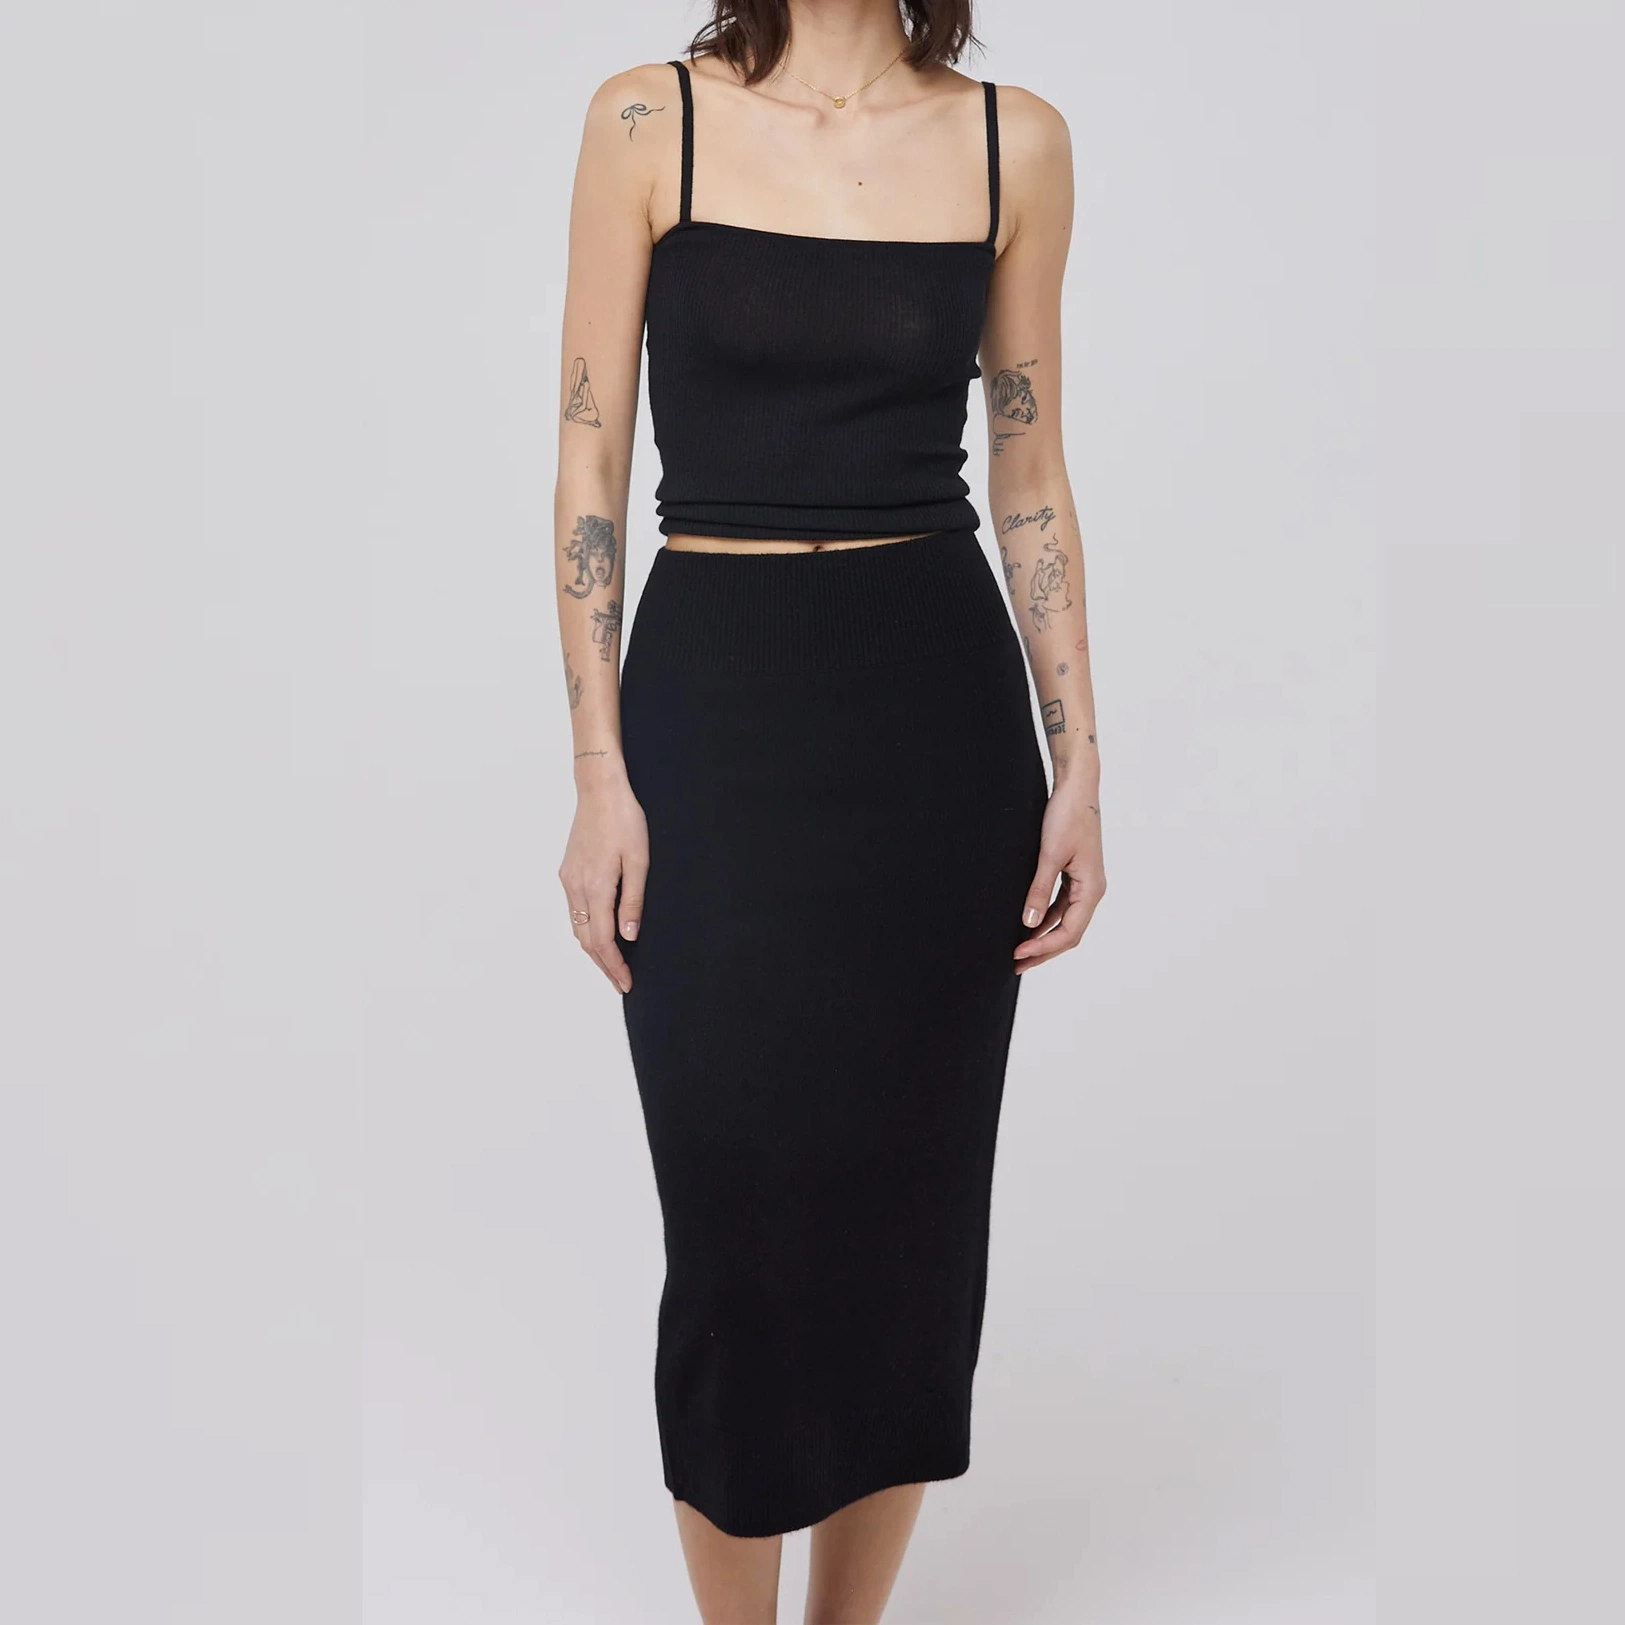 2023 New Collection Arrived 100% Cashmere Knitted MIDI Skirt Apparel Accessories